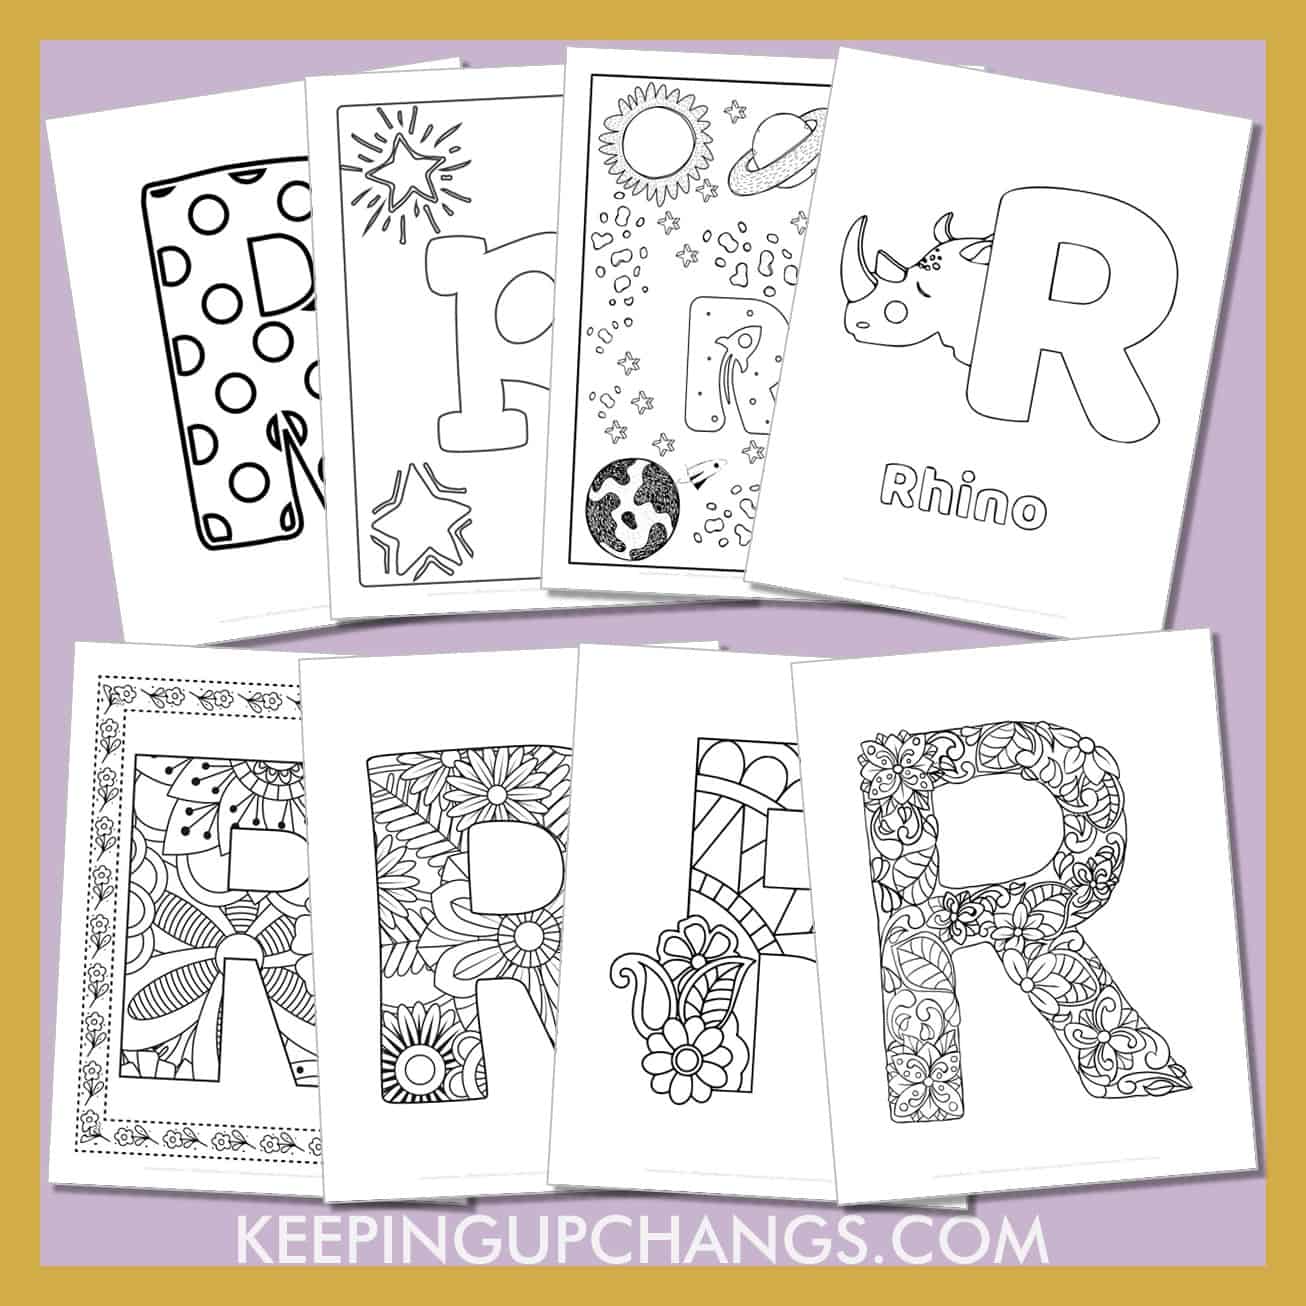 free alphabet letter r to color for toddlers, preschool, kindergarten, to adults.